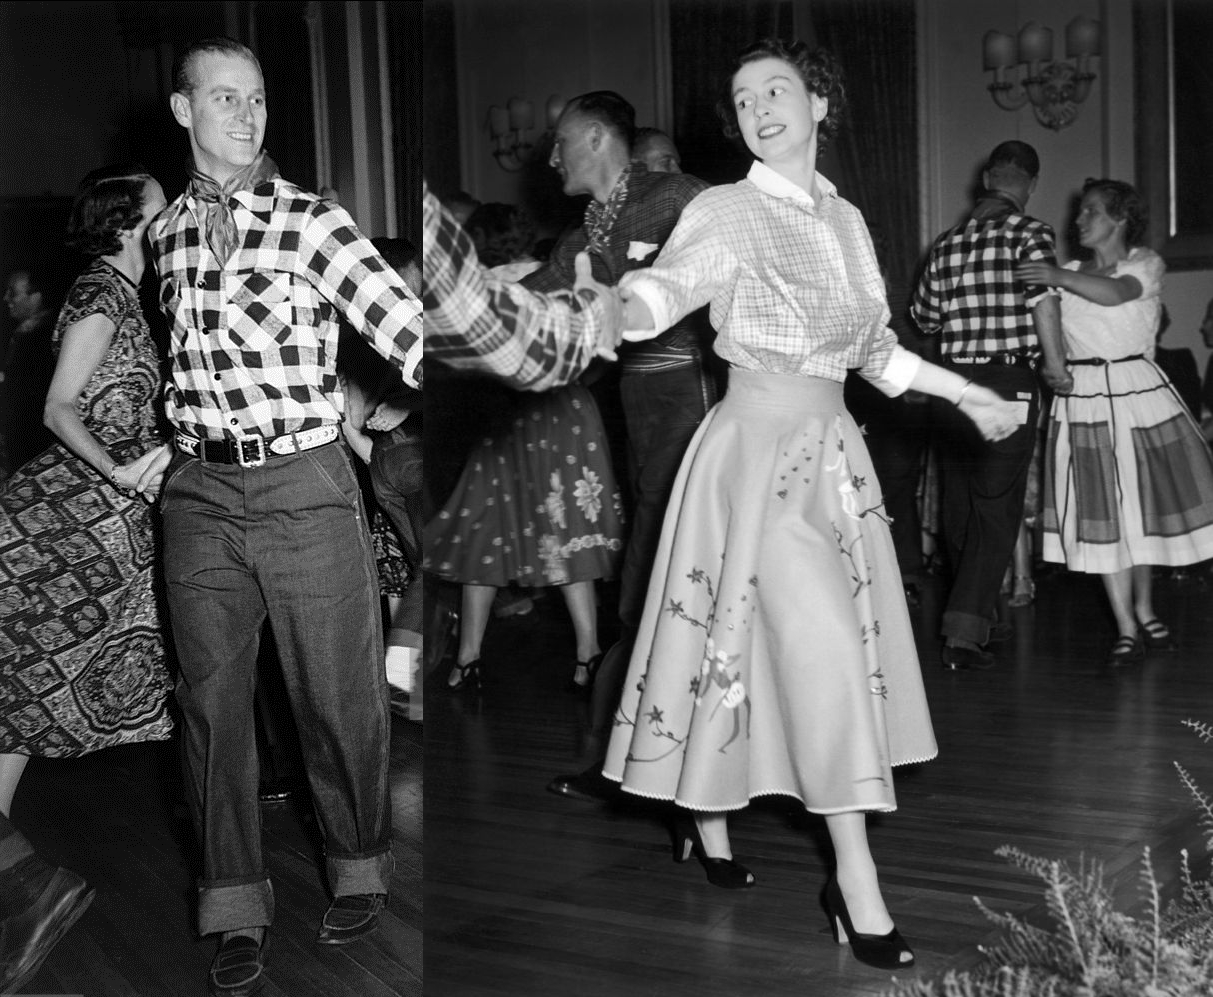 Queen (then princess) Elizabeth in peasant blouse and cotton skirt, with her husband Prince Philip in checkered shirt and blue jeans, enjoy an old-fashioned hoedown at a private party in Ottawa, Canada, October 11, 1951.